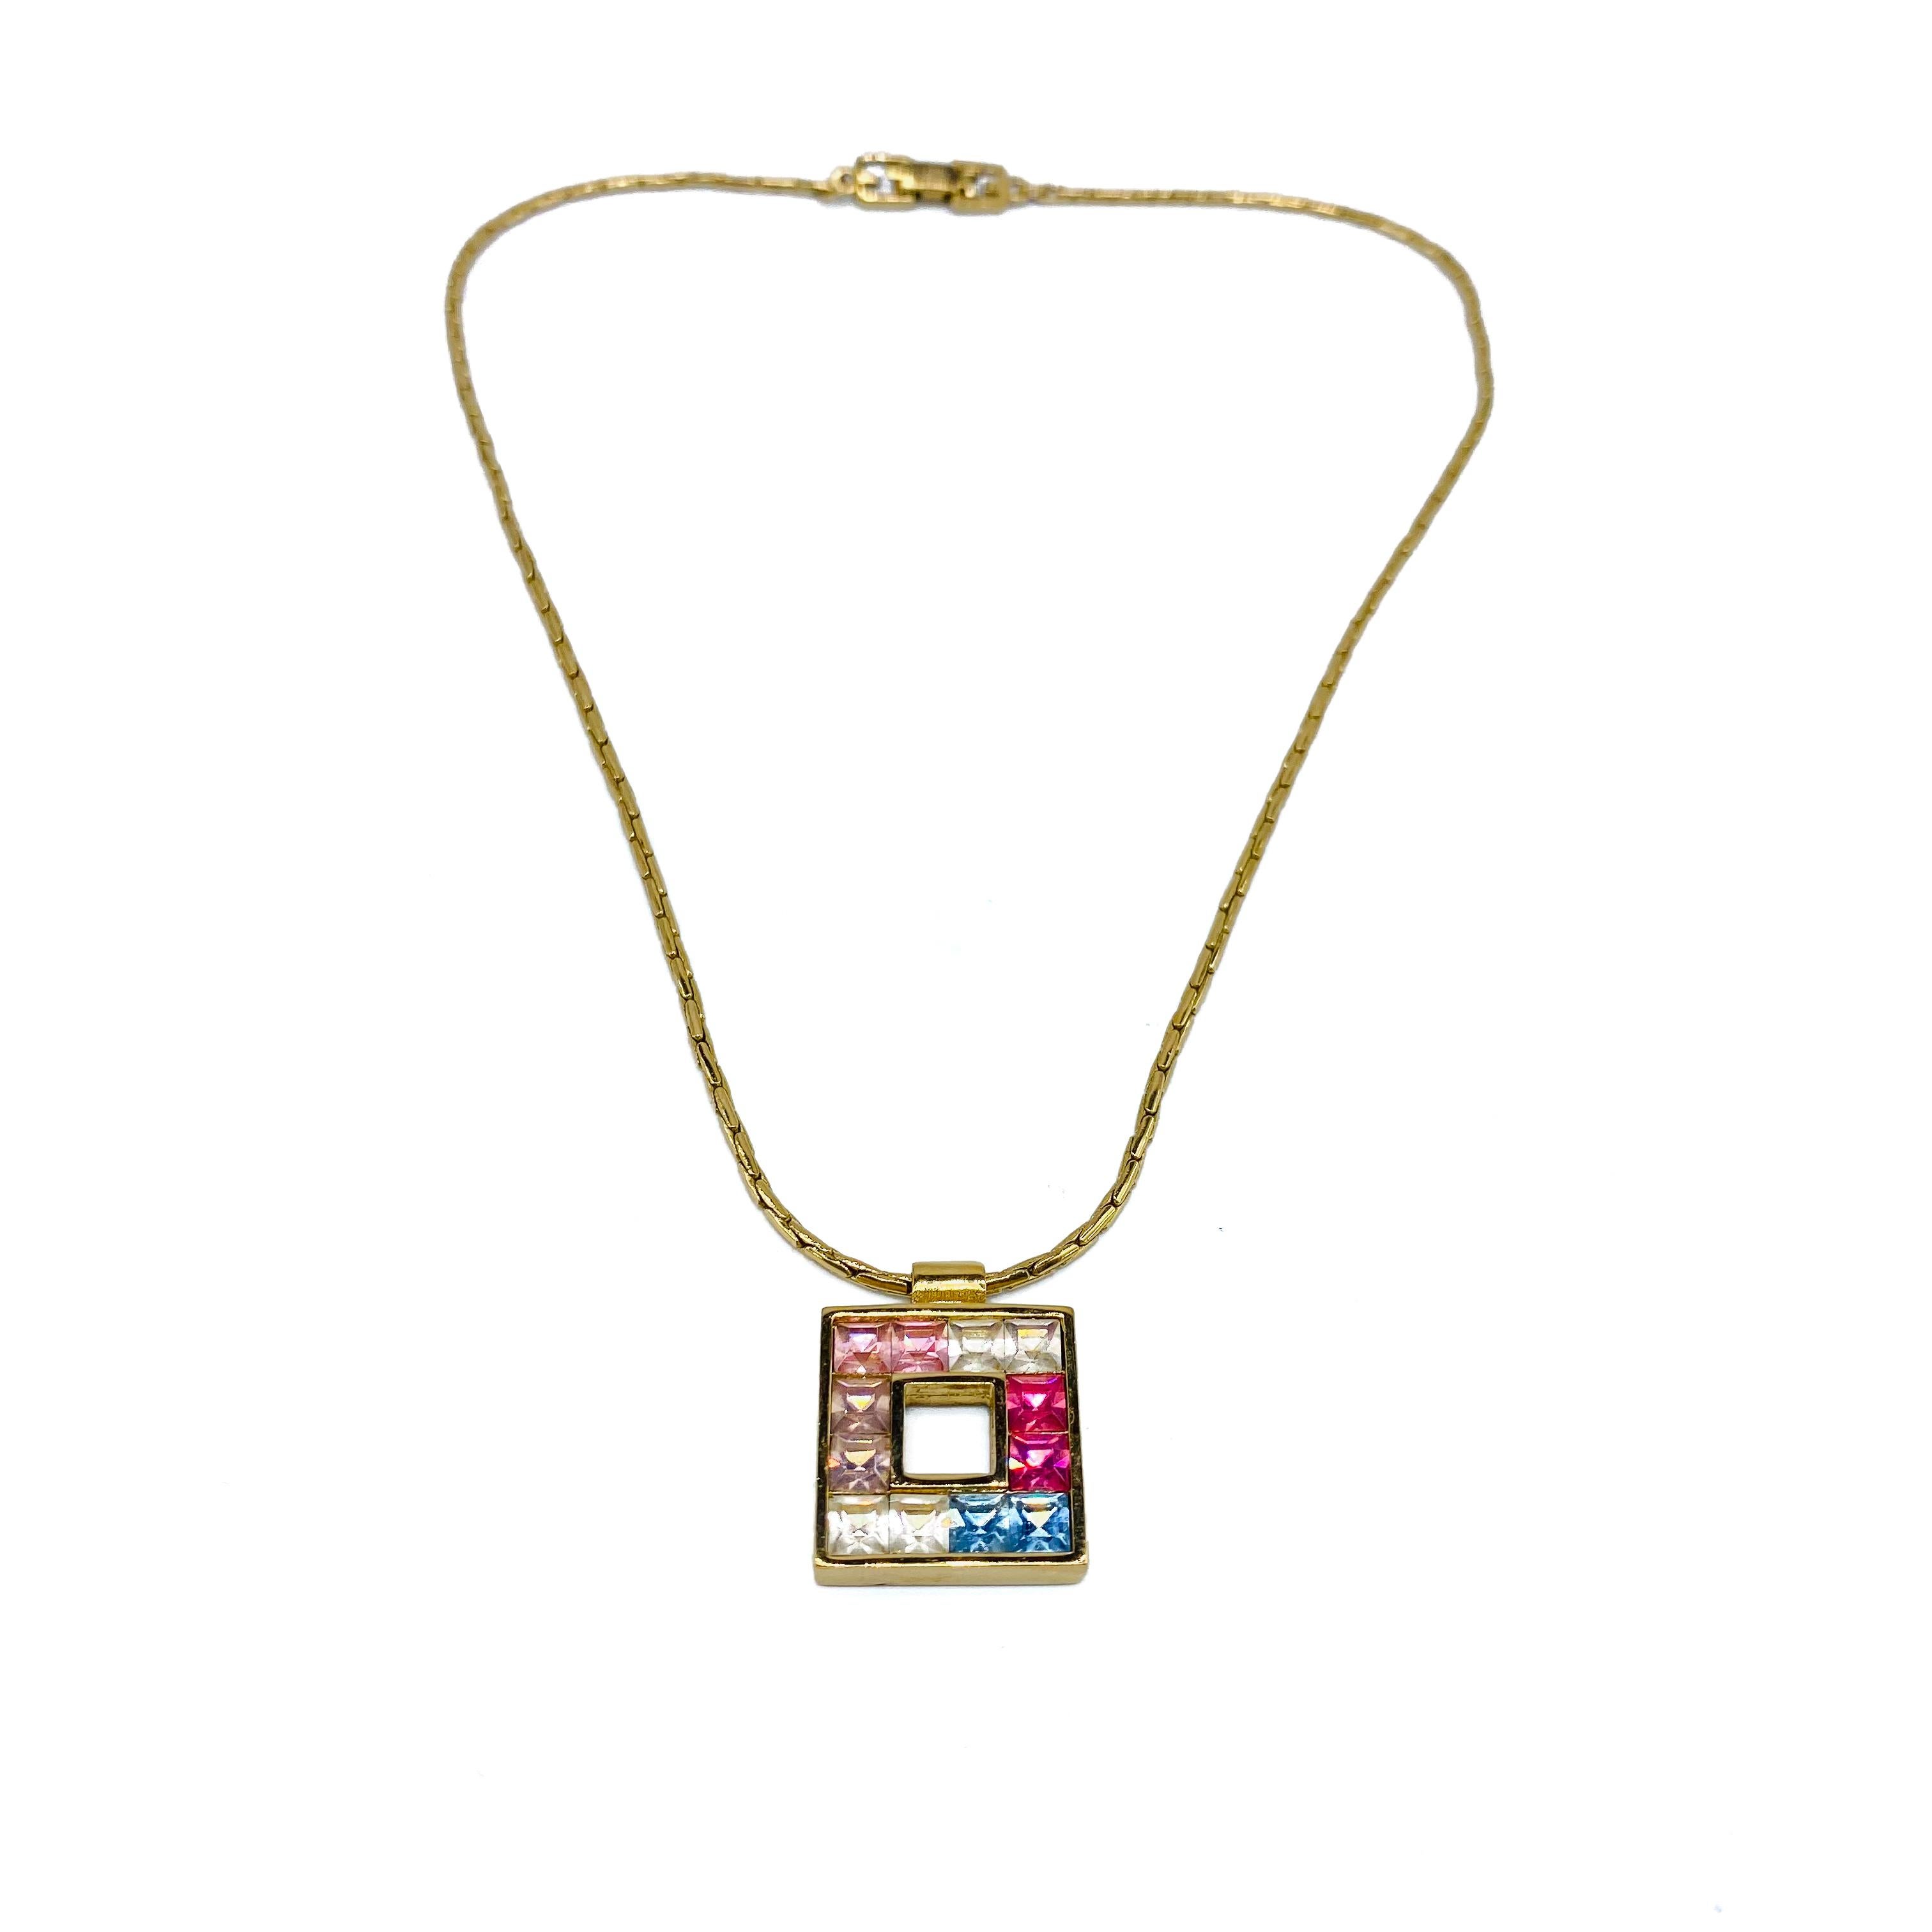 Vintage Givenchy Gold Plated Pendant Necklace 1980s